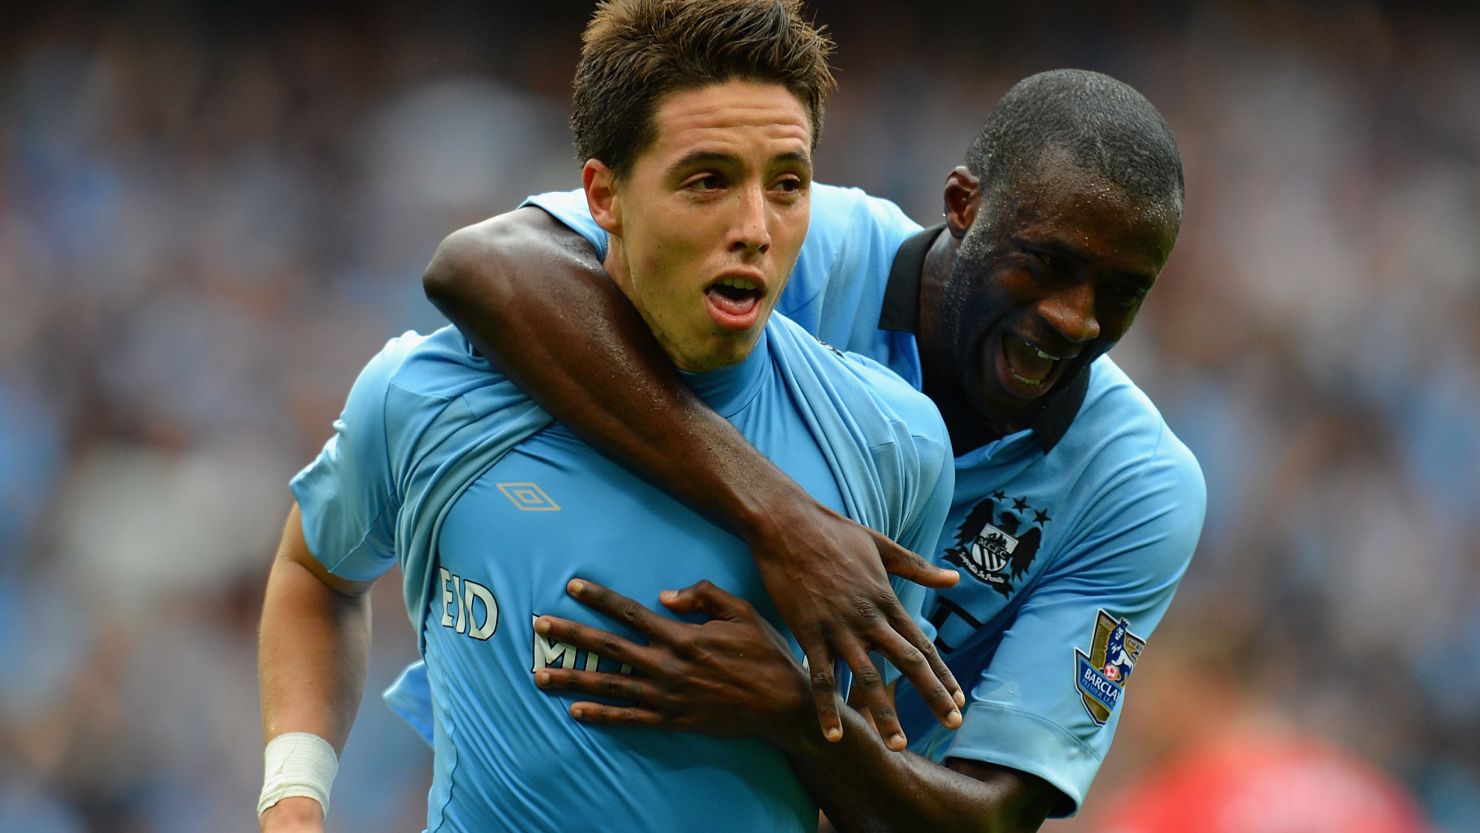 Samir Nasri is congratulated by Yaya Toure after scoring the winning goal for Manchester City at the Etihad Stadium.